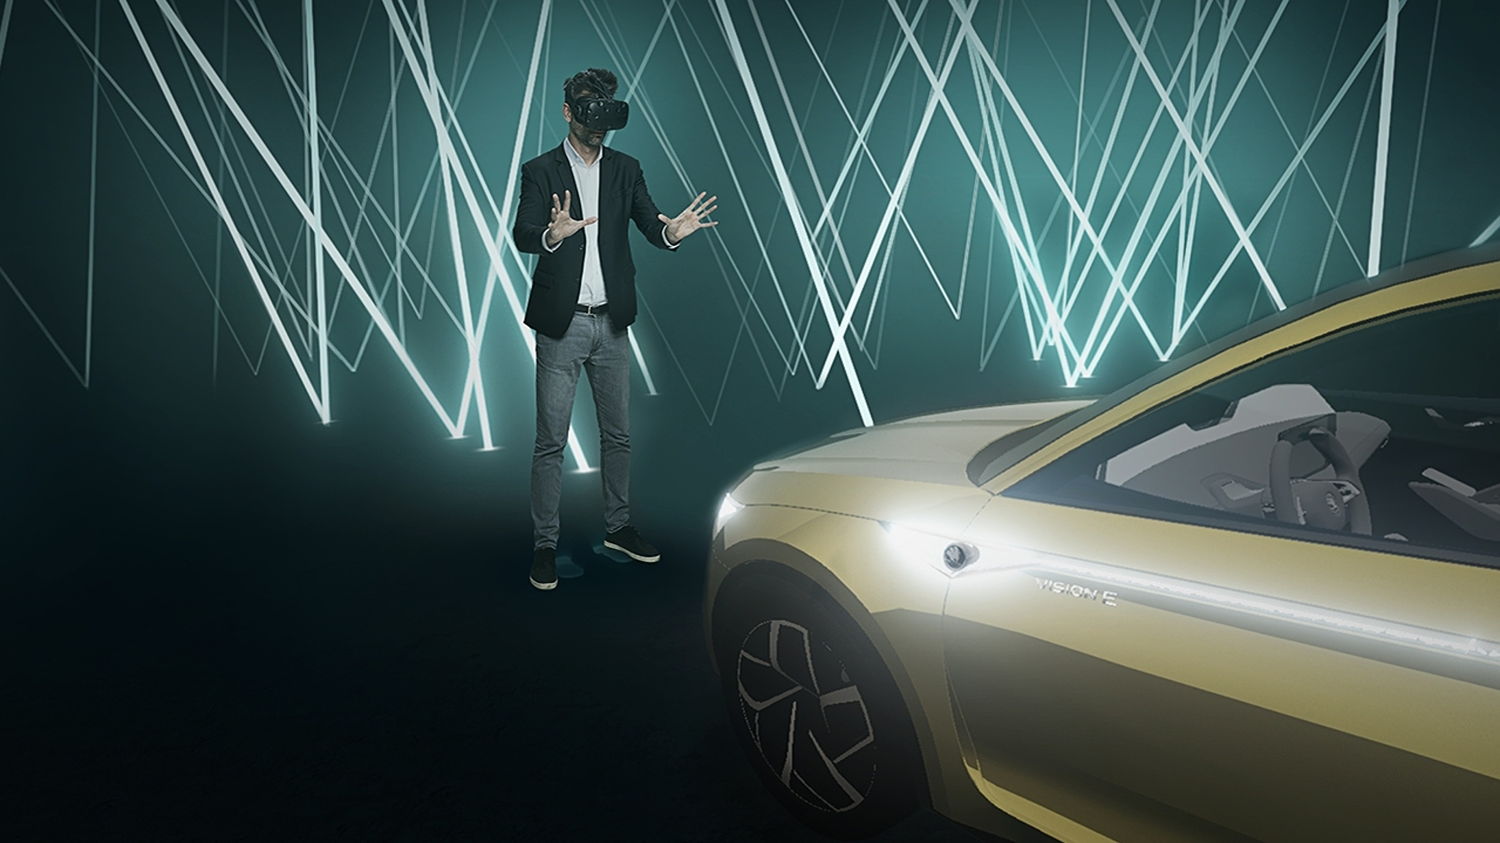 ŠKODA is embarking on the mobility of the future with the new VISION E concept vehicle, allowing fans, friends and customers to participate all over the world. Thanks to virtual reality, smartphone users can experience the presentation of the brand’s first electric study on April 19, 2017 in Shanghai and explore the details of the ŠKODA VISION E.